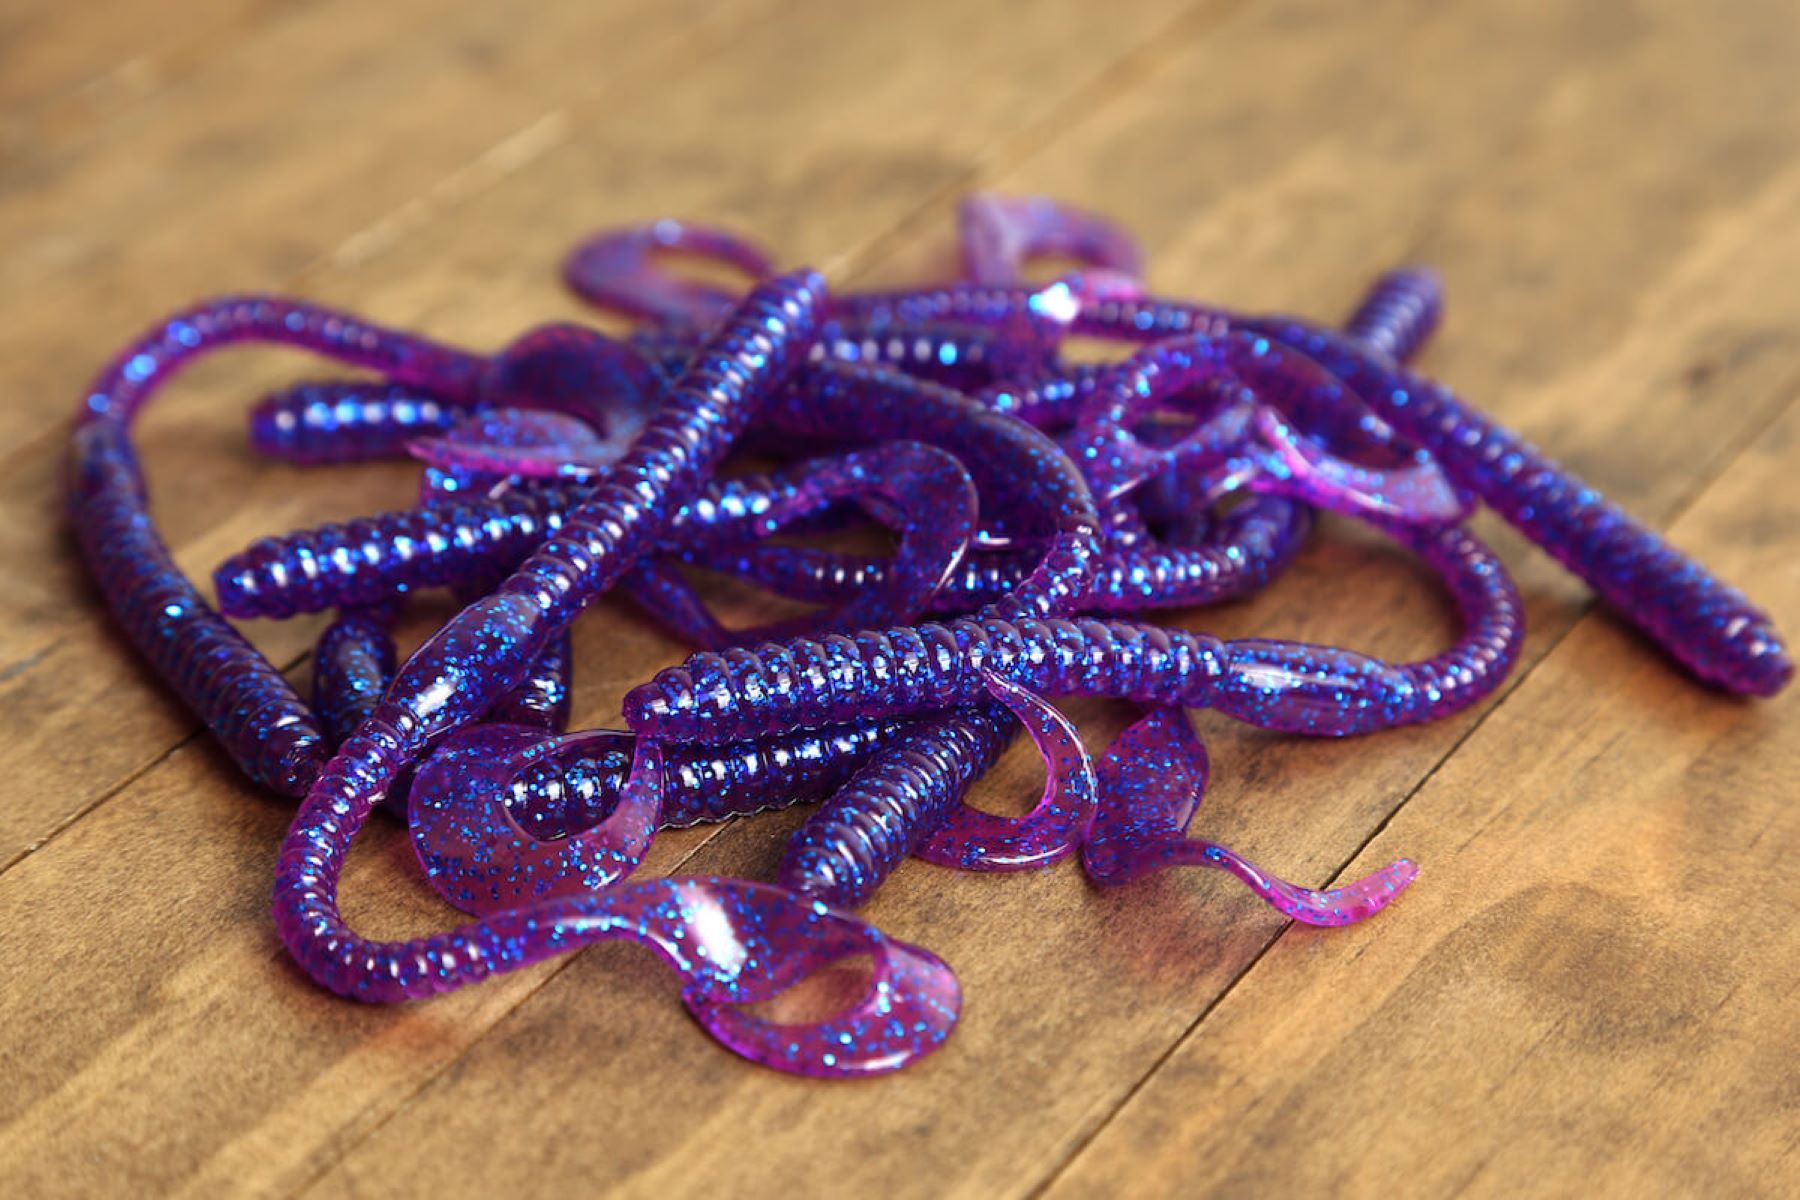 How To Store Soft Plastic Baits